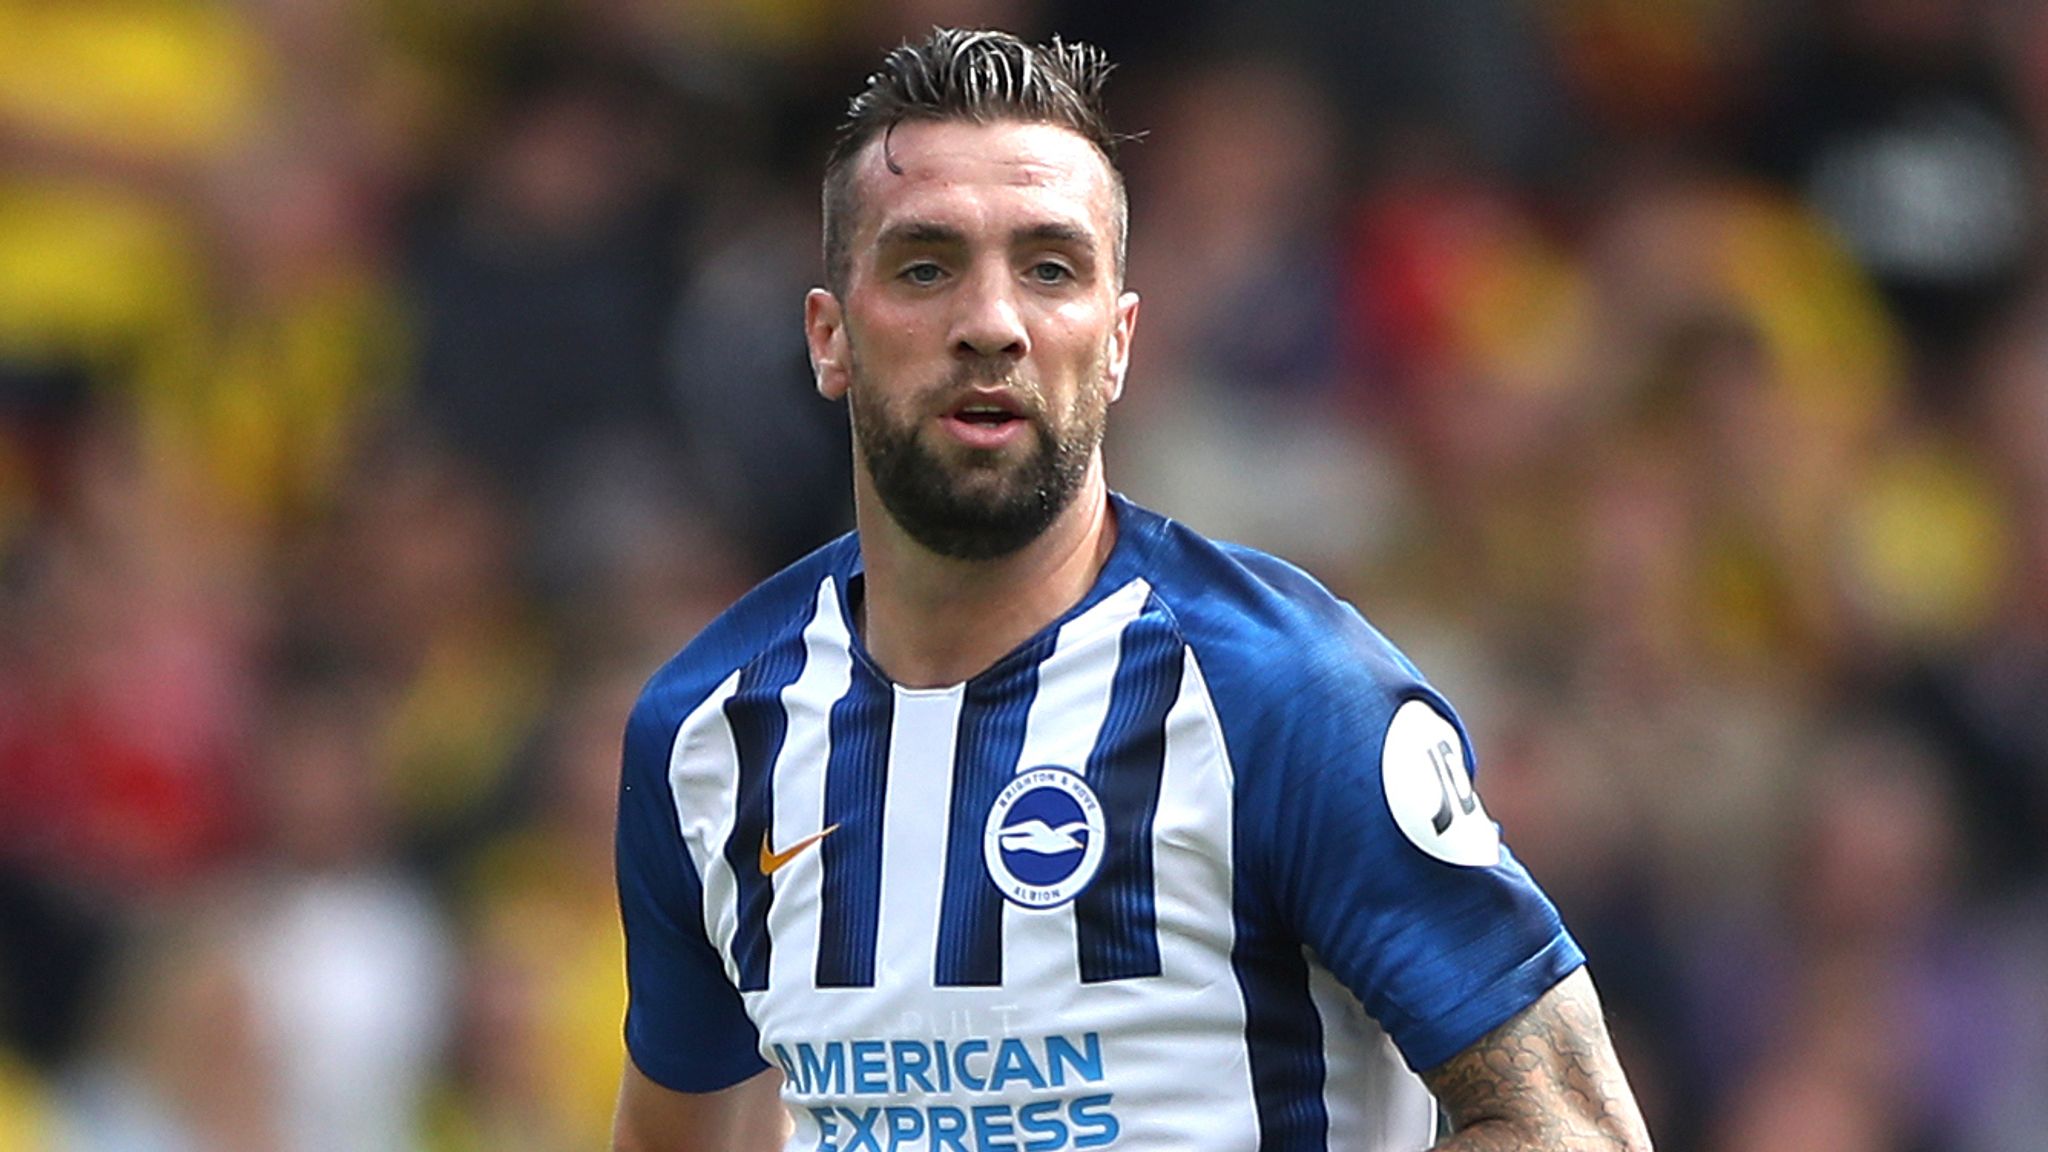 Shane West Brom lead race to sign Brighton defender | Football News | Sky Sports